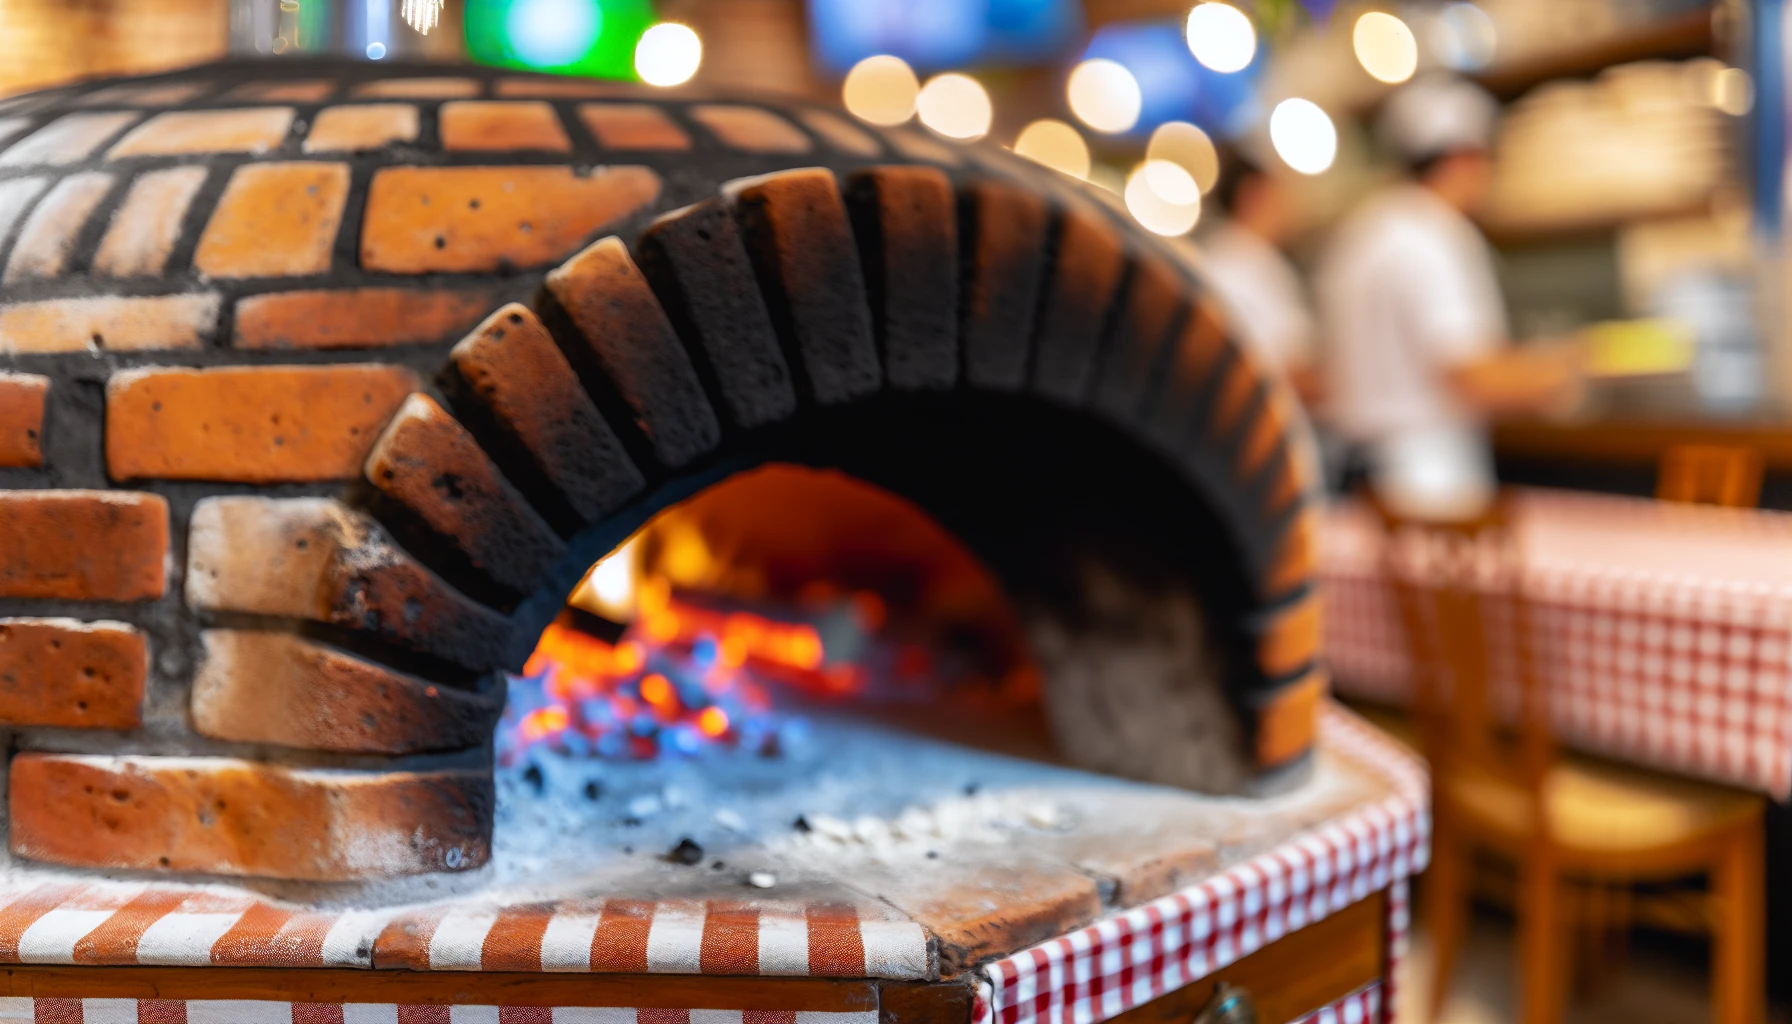 A traditional brick oven for making Venetian pizza